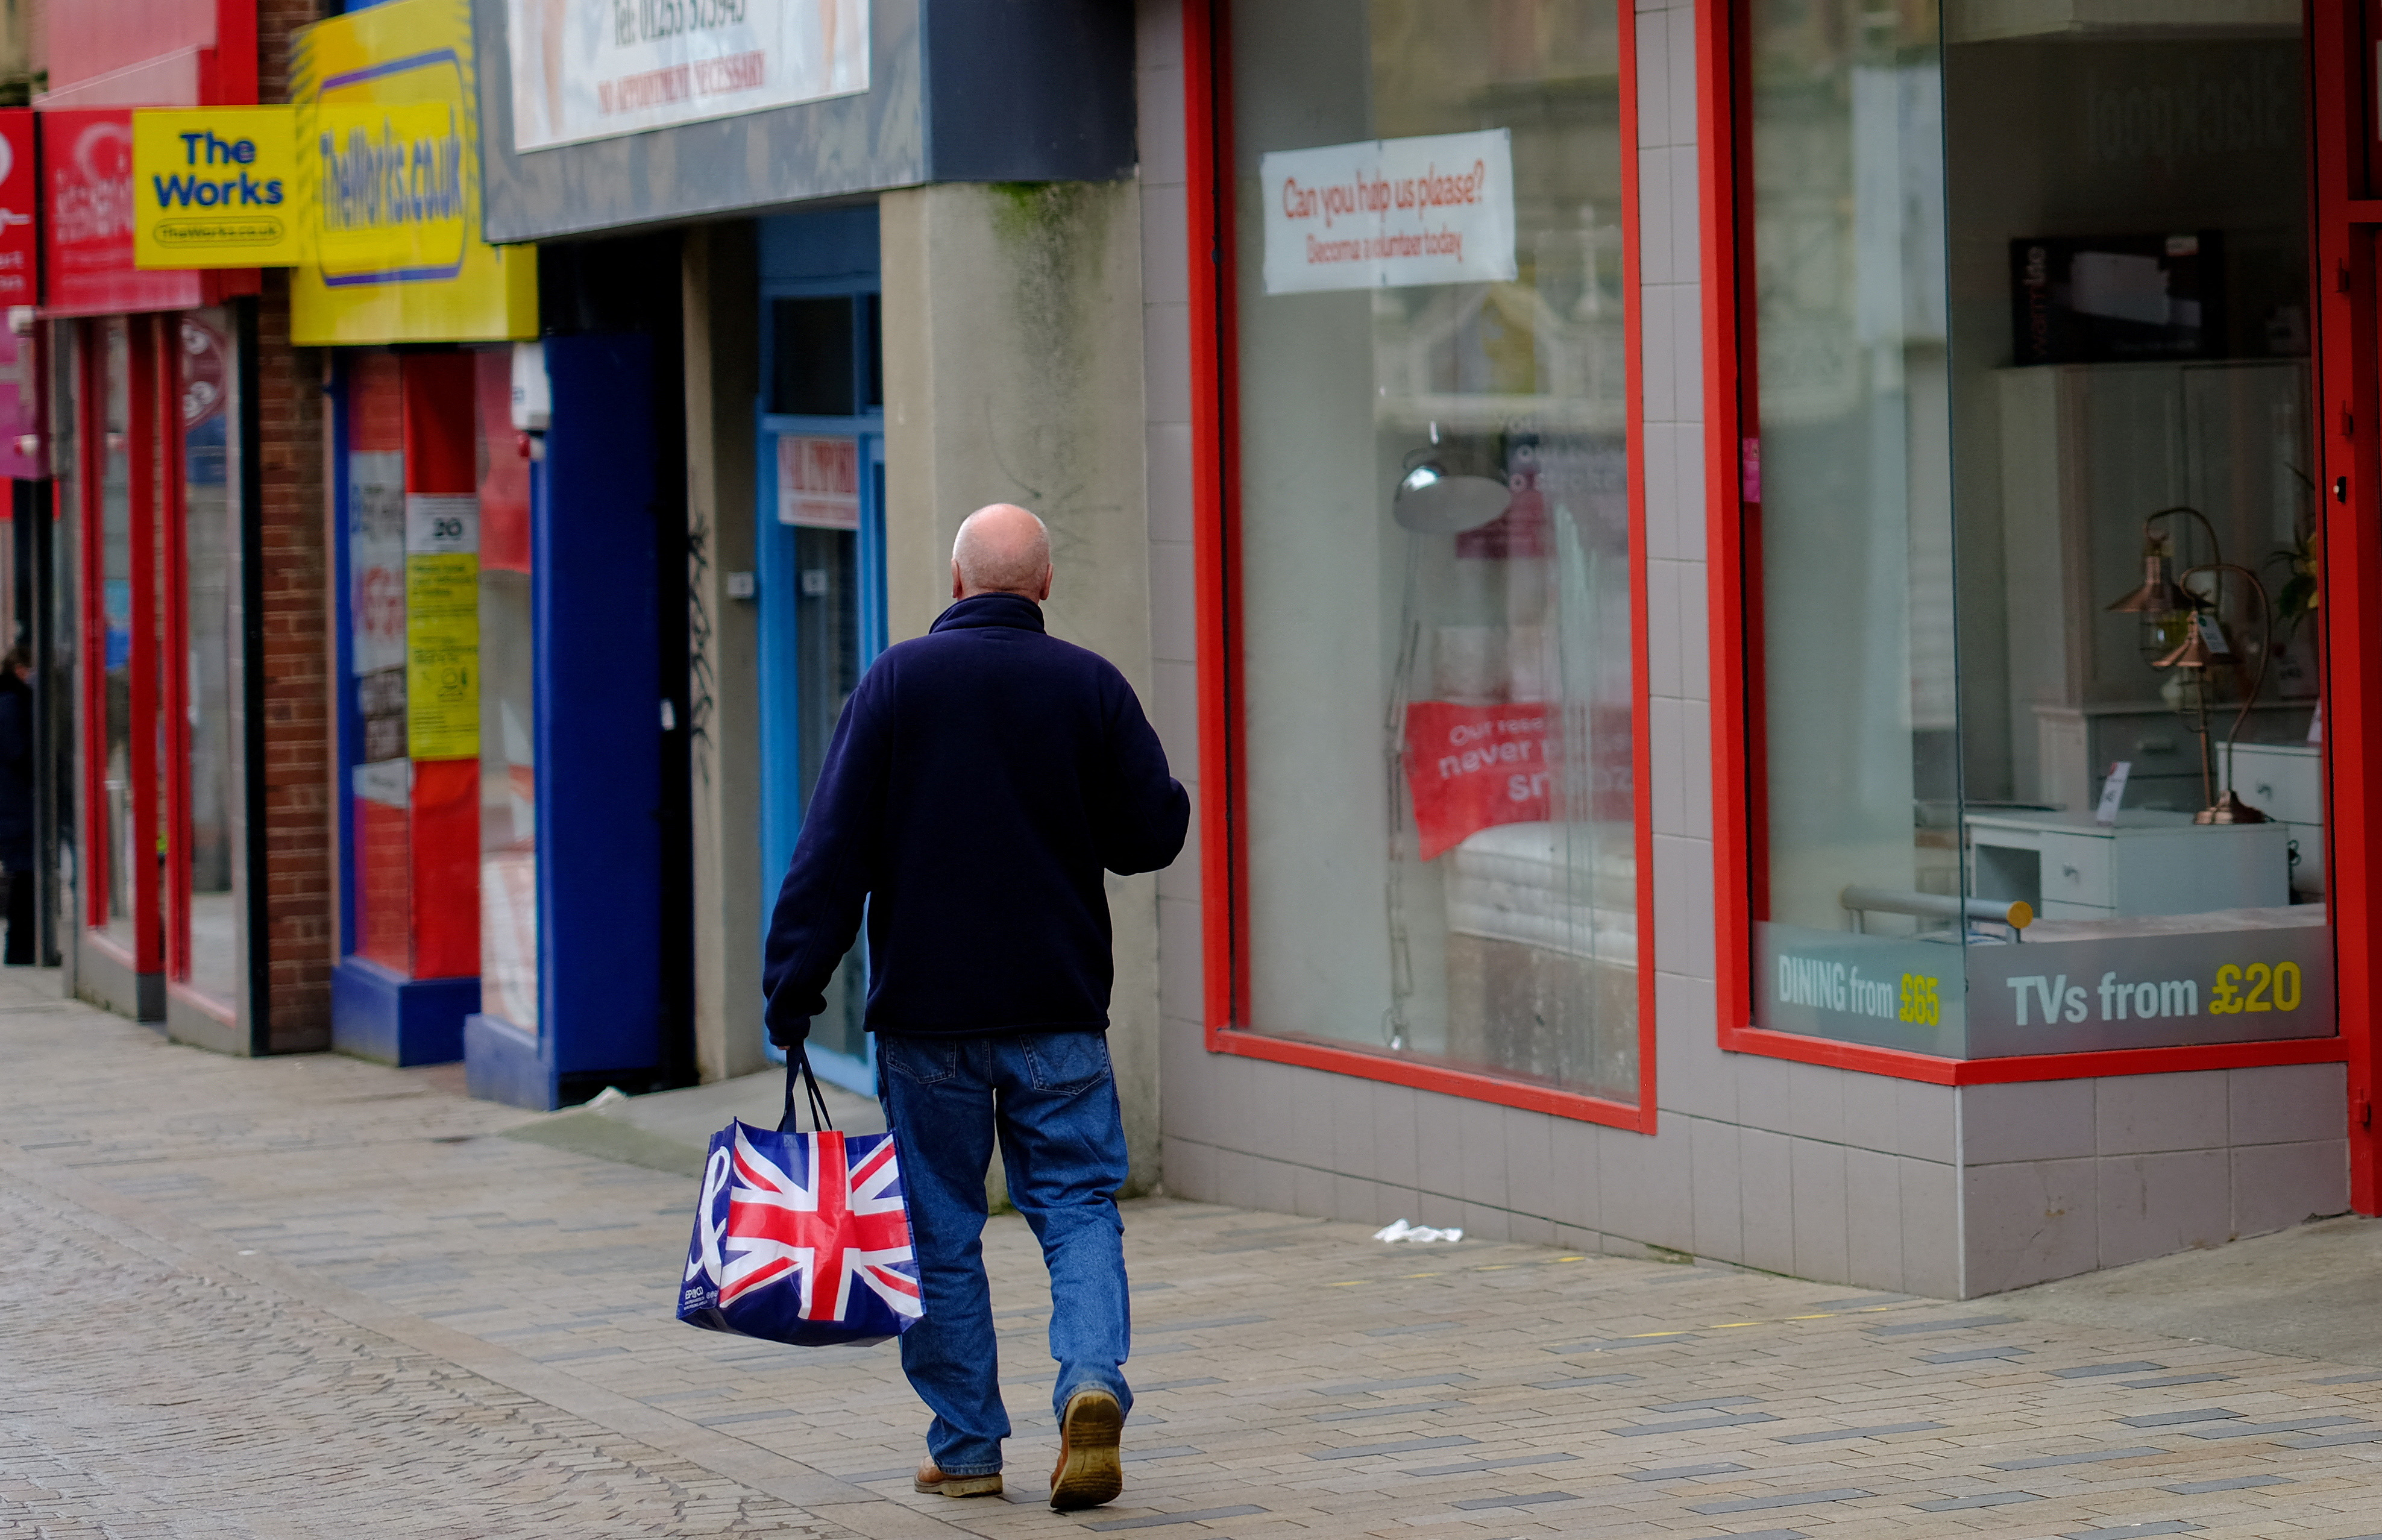 A man carries a Union Jack themed shopping bag as he walks along an empty shopping street in Blackpool